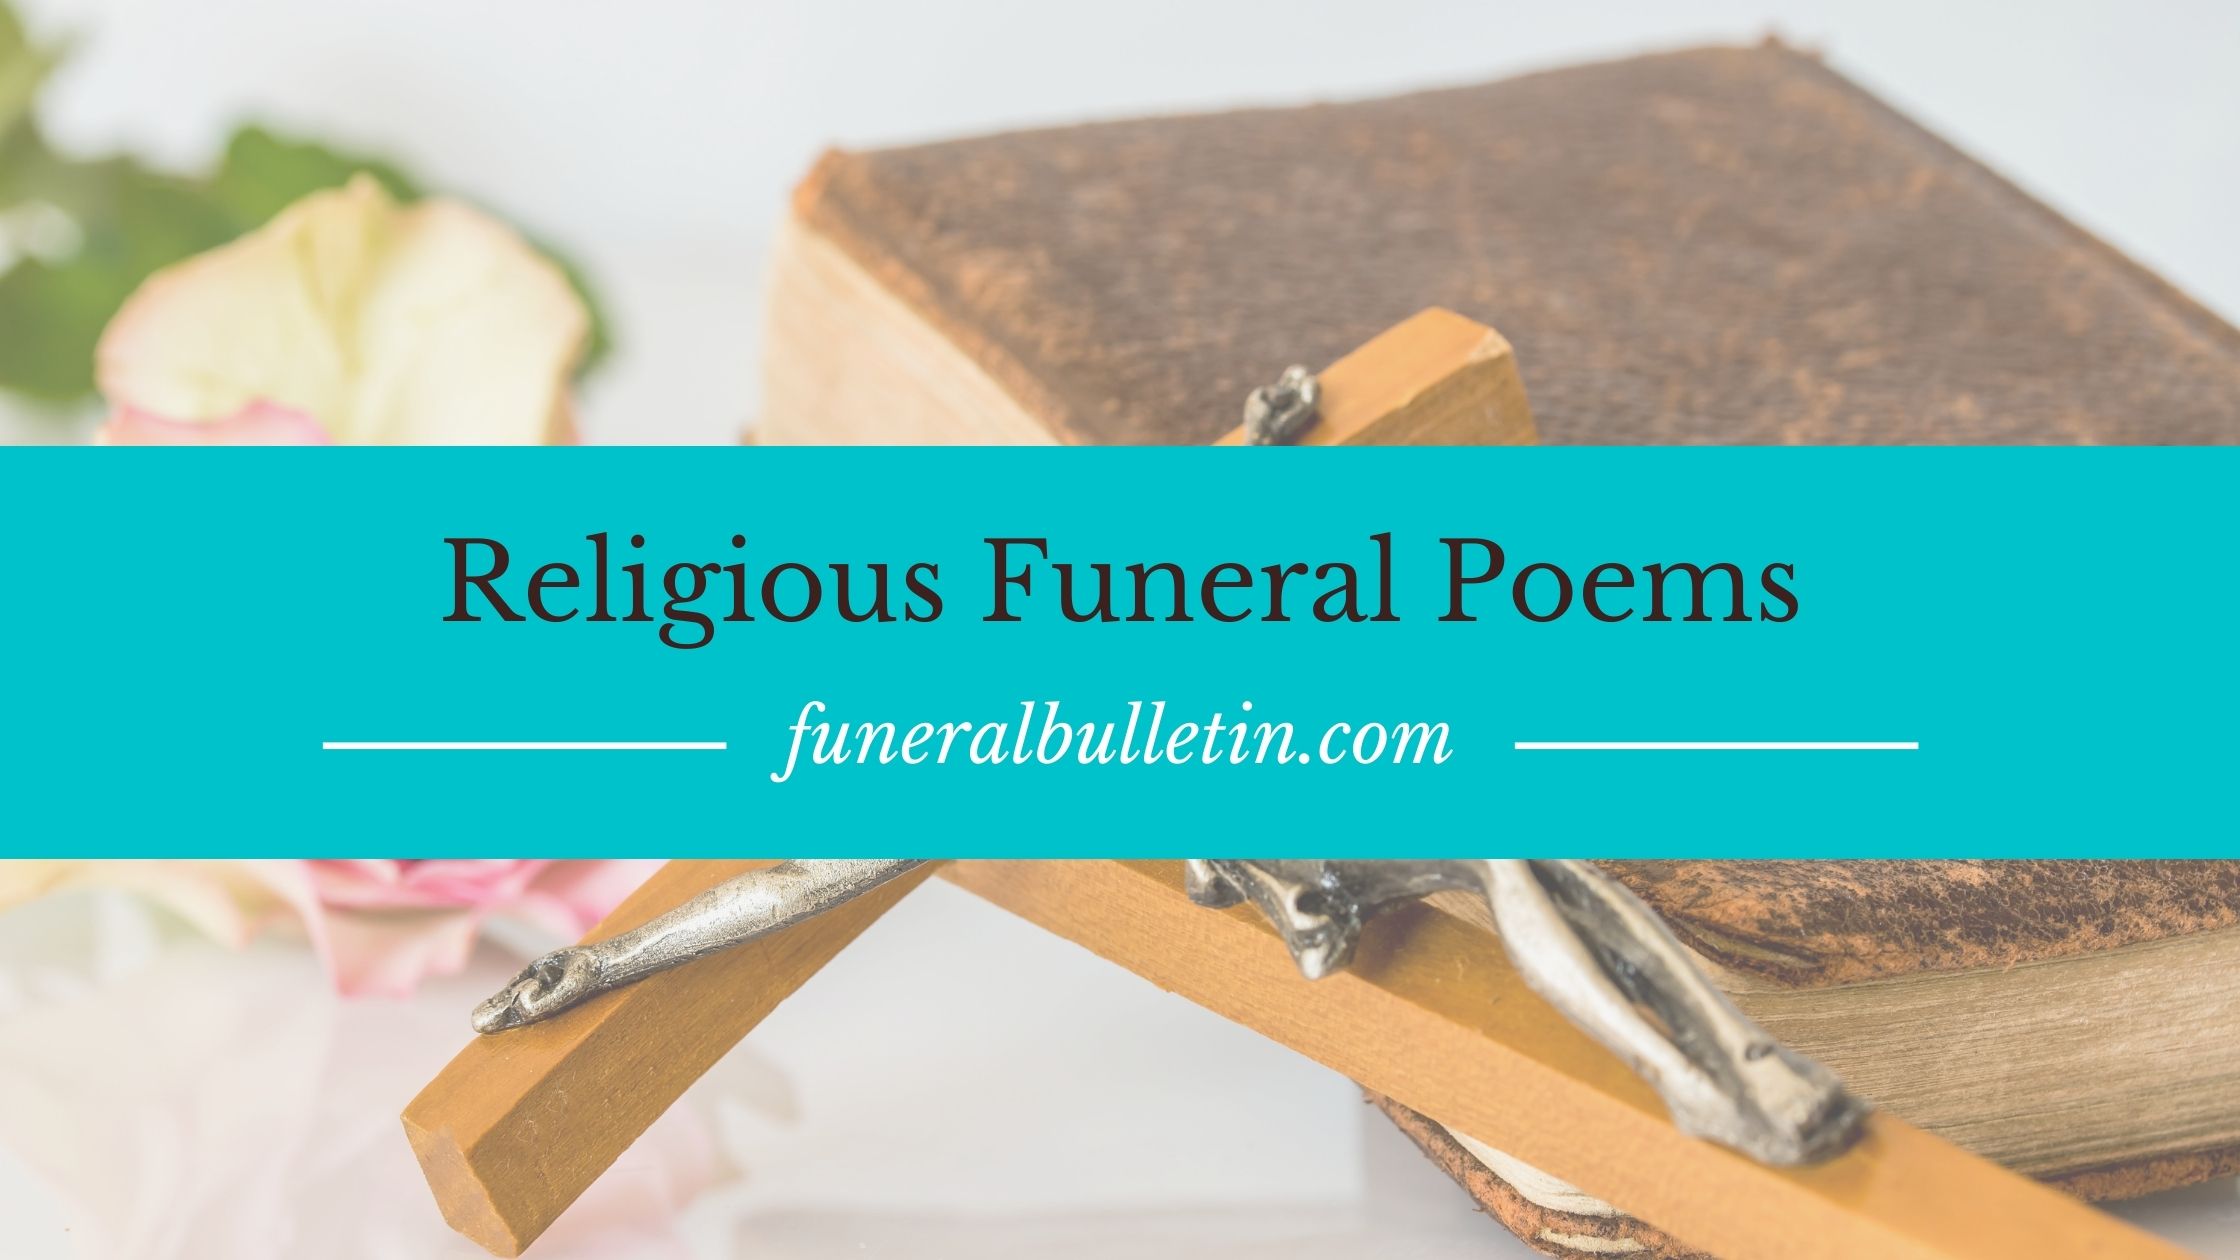 Religious Funeral Poems